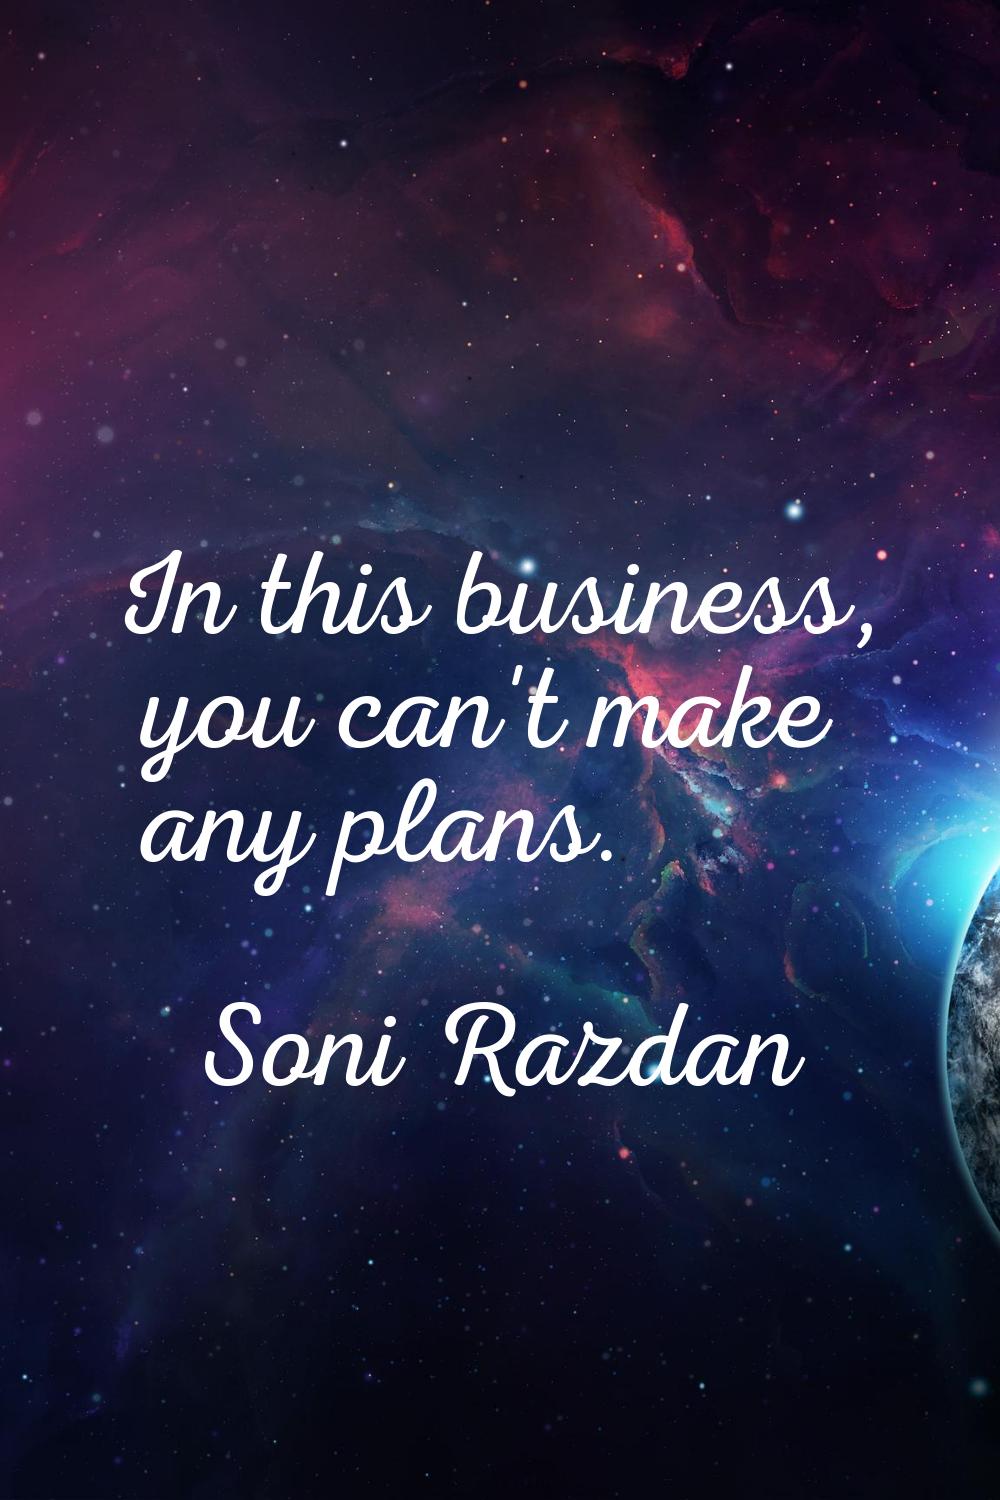 In this business, you can't make any plans.